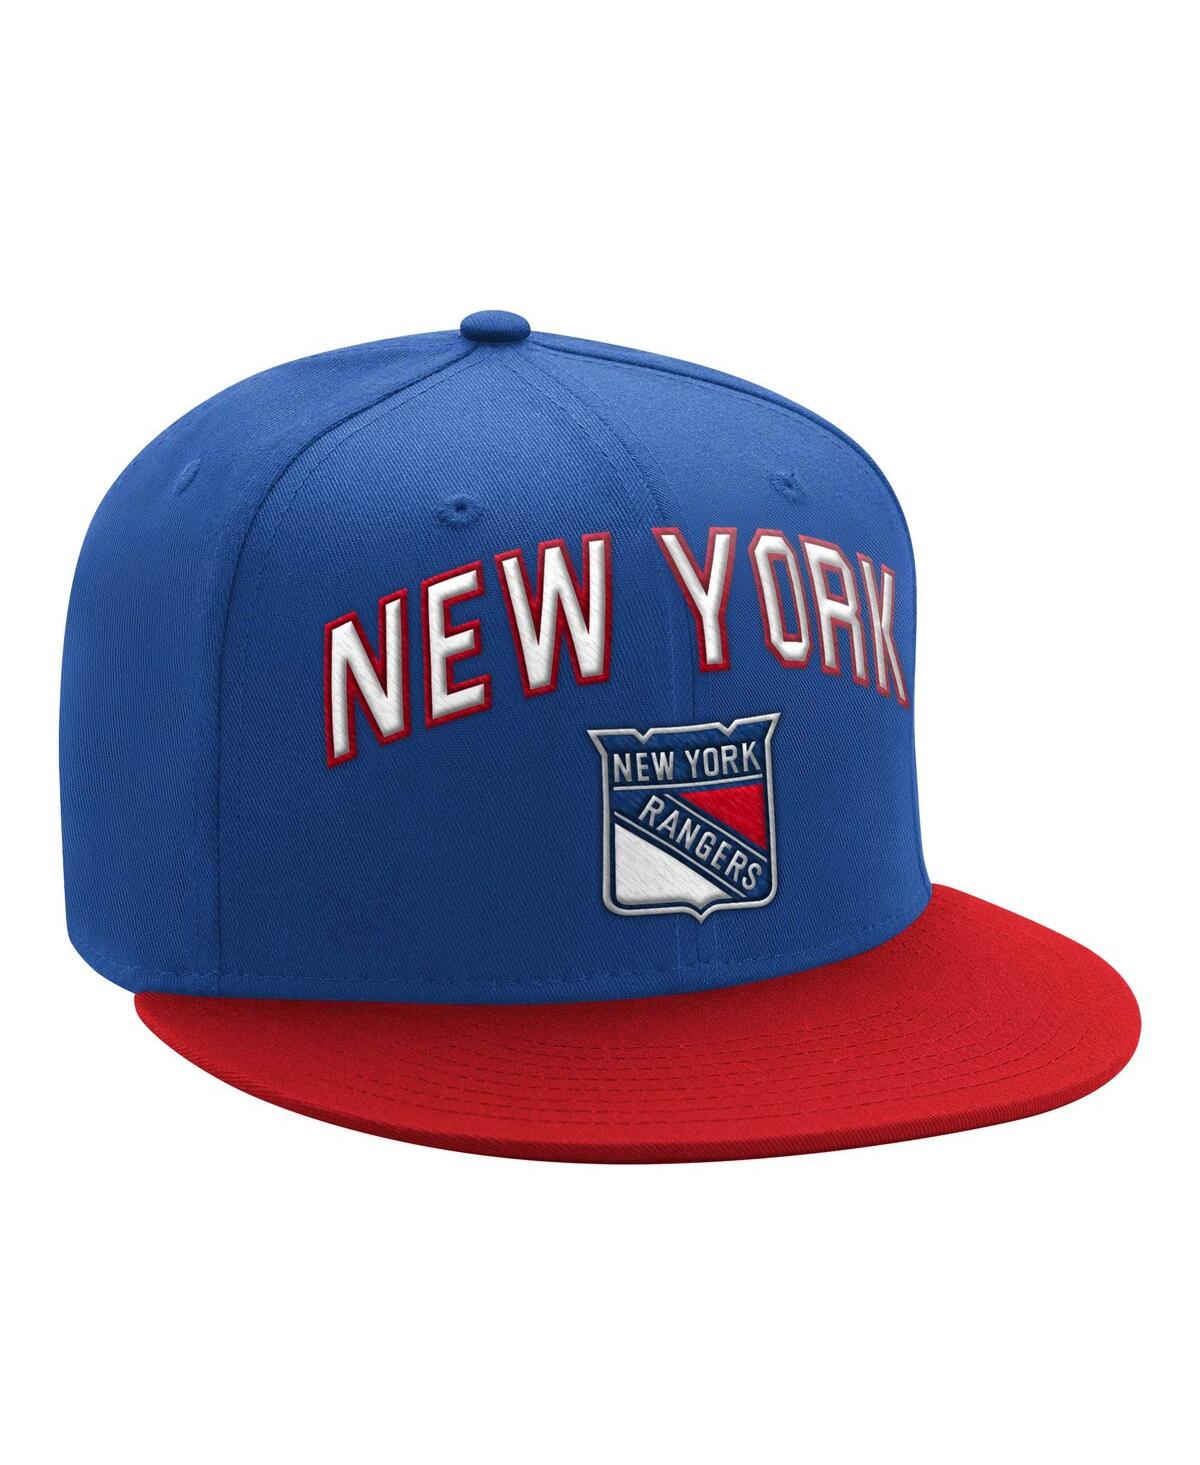 Men's Blue/Red New York Rangers Arch Logo Two-Tone Snapback Hat - Blue Red